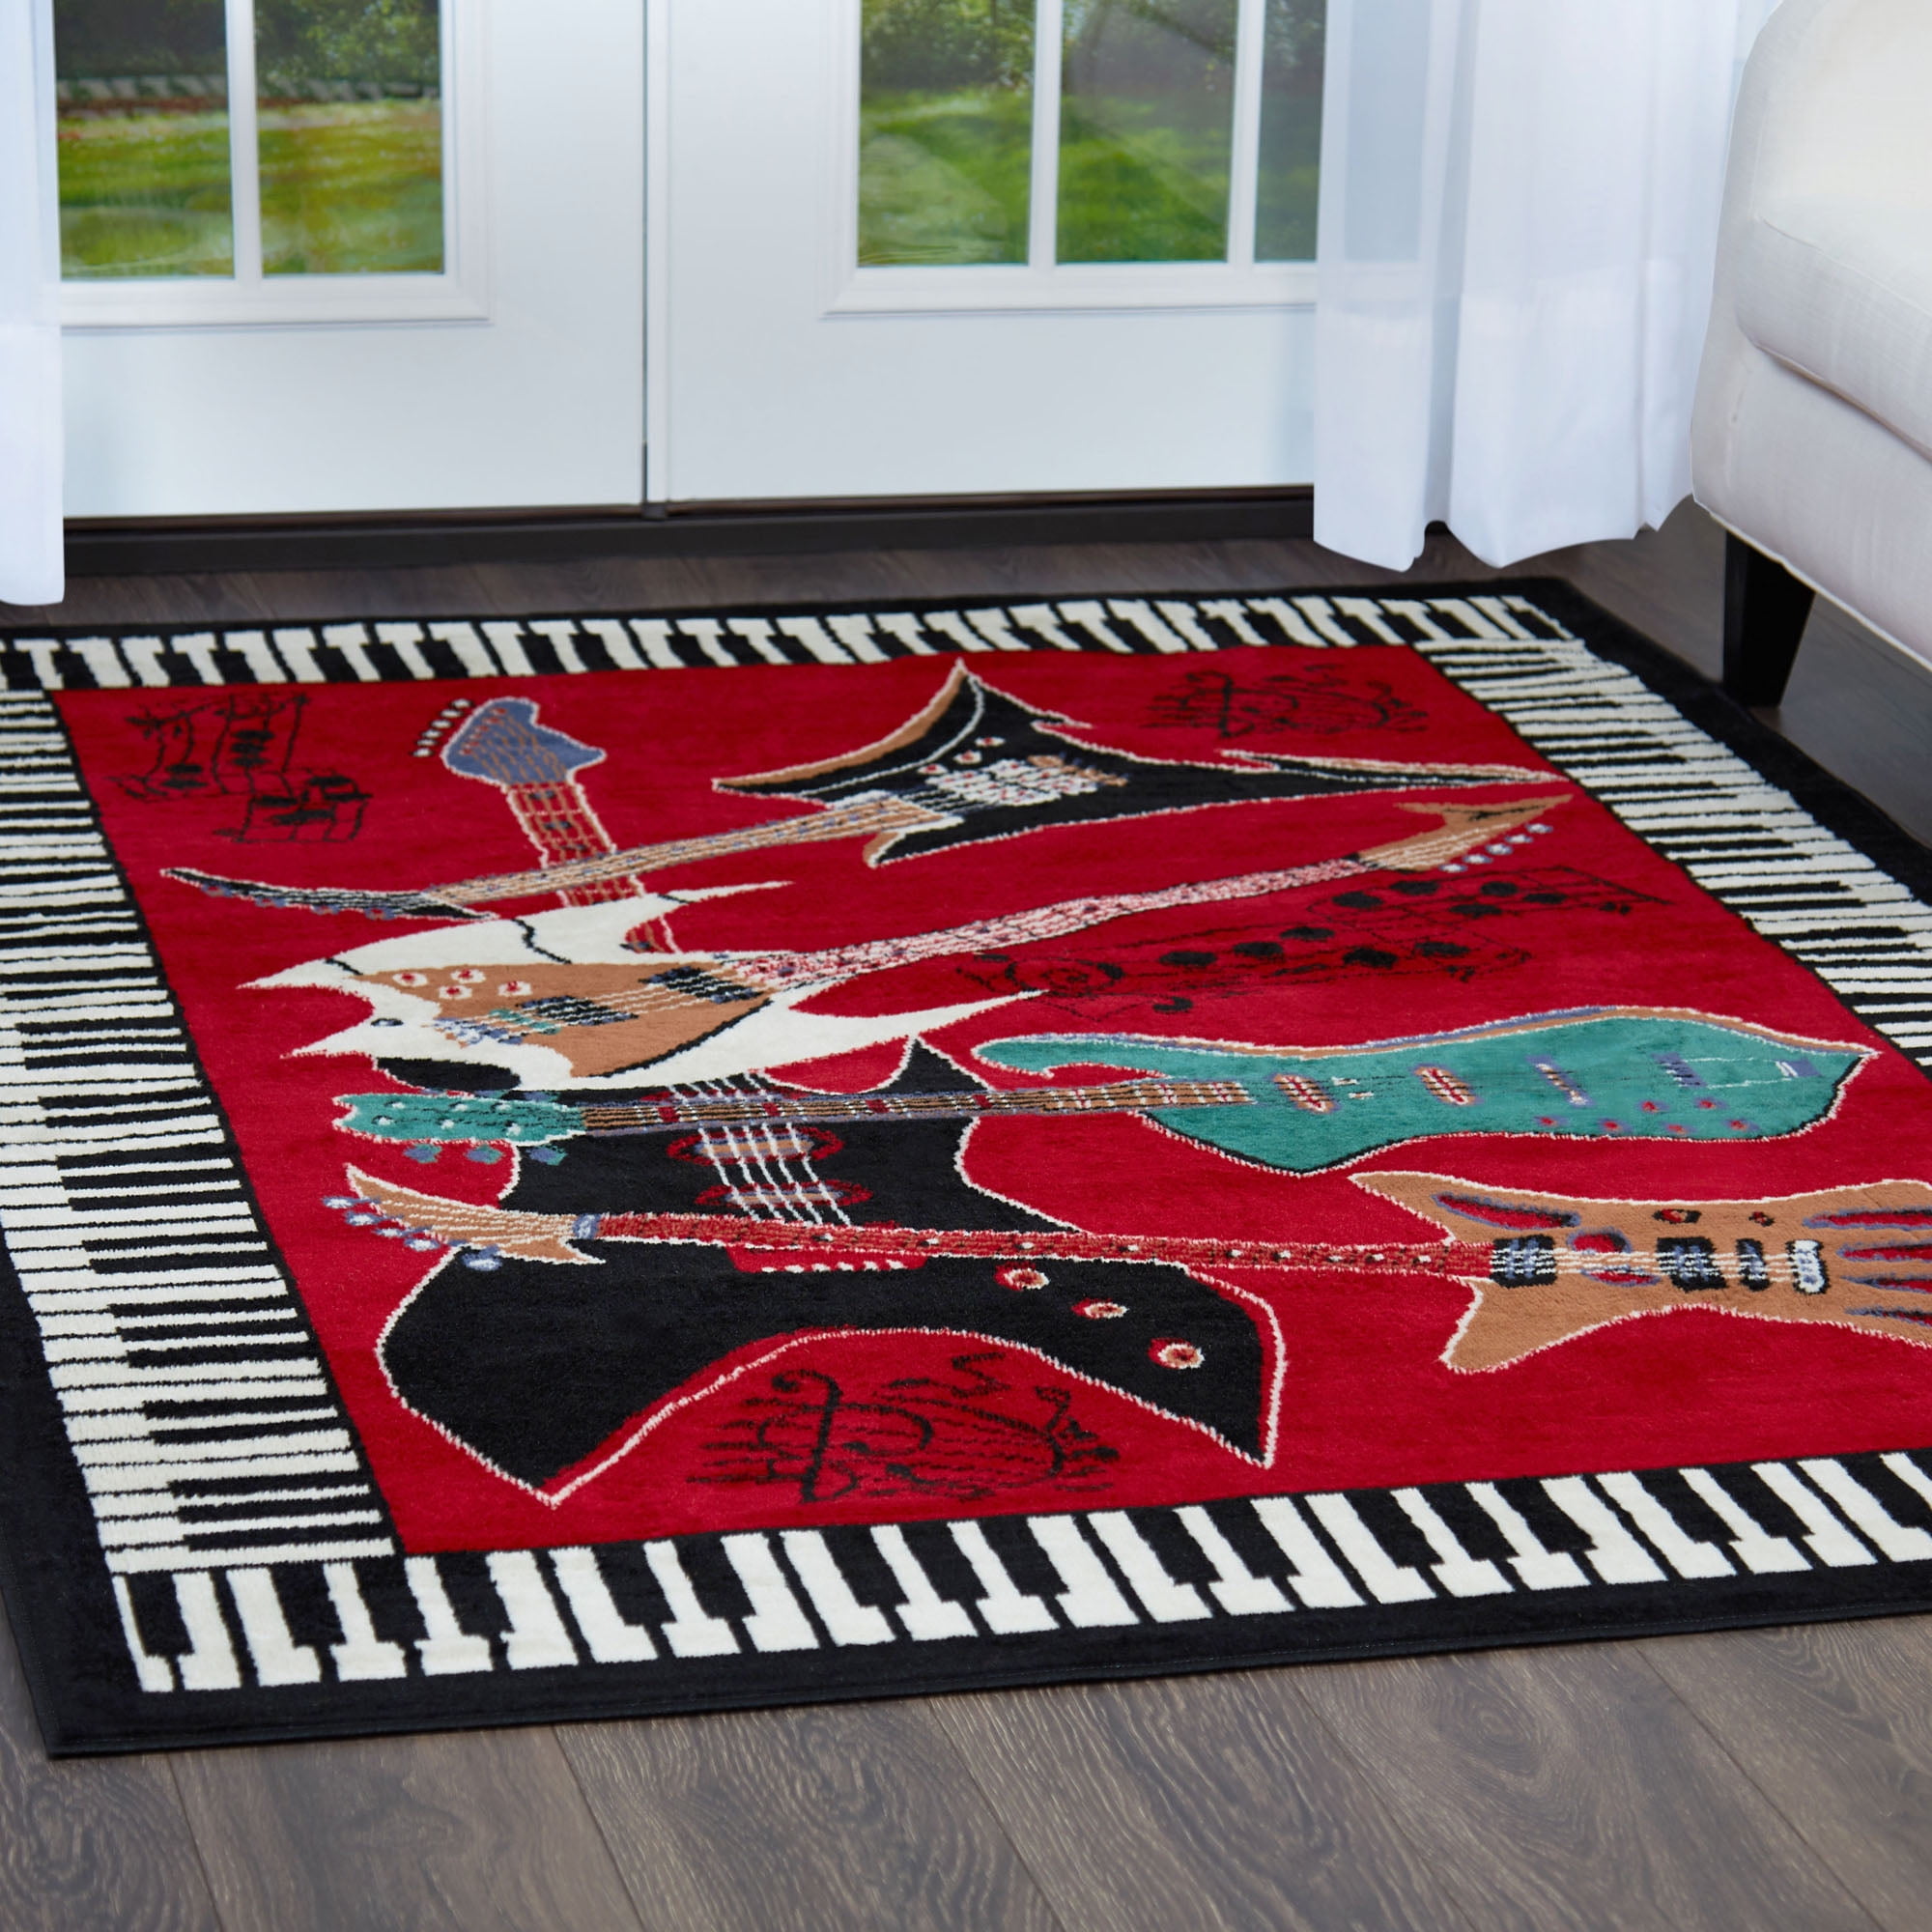 ALAZA Music Notes Flower Floral Collection Area Mat Rug Rugs for Living Room Bedroom Kitchen 2' x 6' 